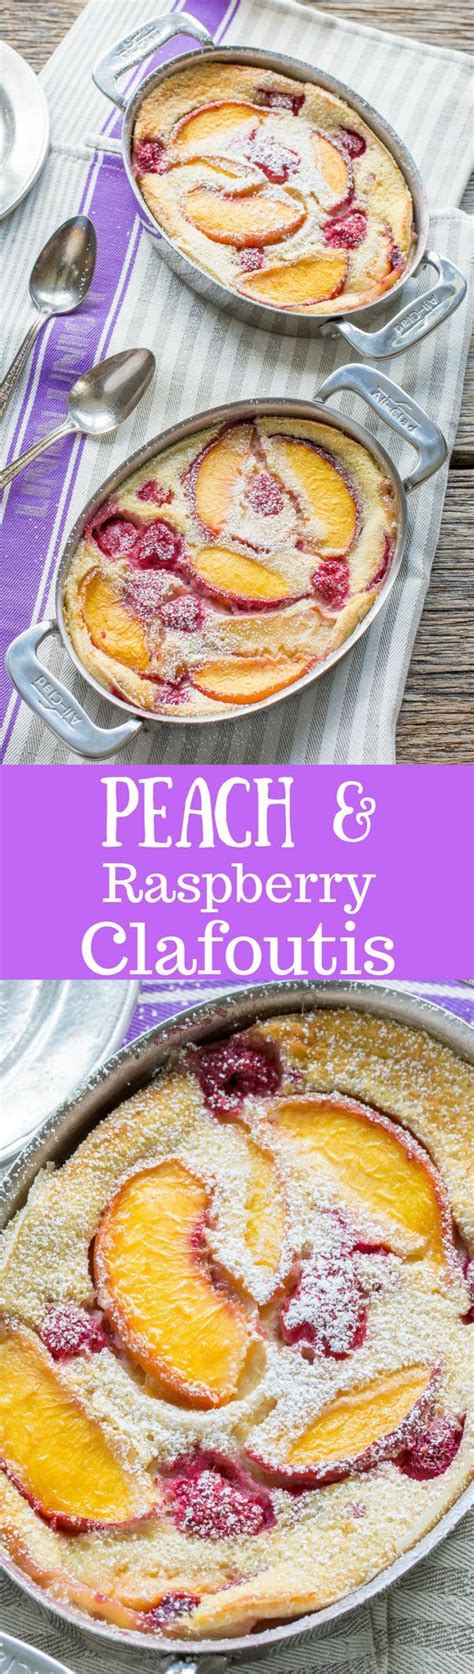 Fresh Peach & Raspberry Clafoutis | Recipe | Traditional french desserts, French desserts ...